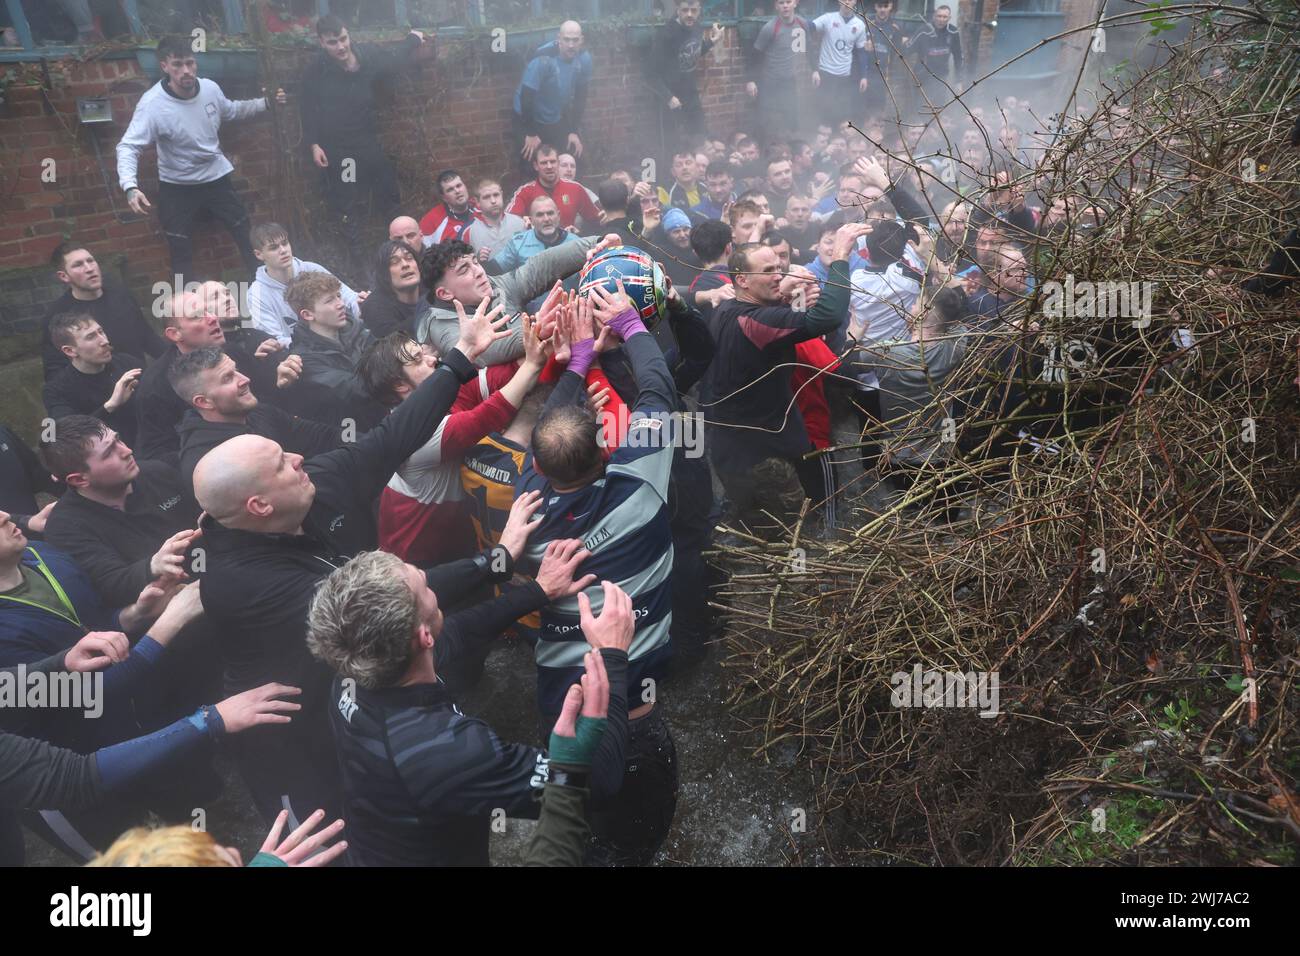 The Royal Shrovetide Football match has been played between the villagers of Ashbourne in Derbyshire since 1667. One side is known as the Upards and the other side as the Downards. Each team attempts to carry the ball back to their own goal to score. Picture credit should read: Cameron Smith/Sportimage Credit: Sportimage Ltd/Alamy Live News Stock Photo